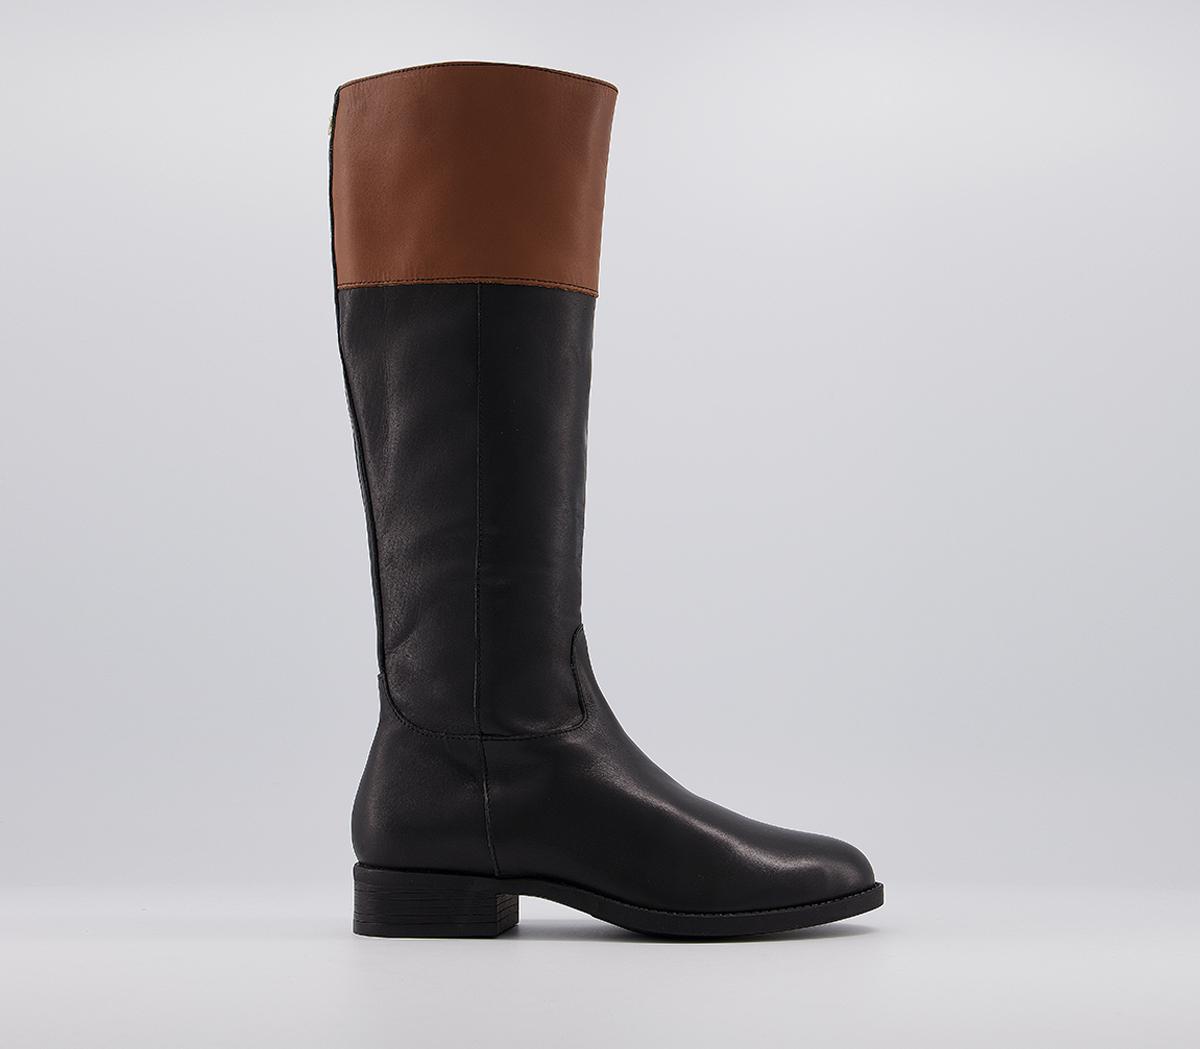 OFFICEKeeping Colour Block Rider Knee BootsBlack Leather Tan Collar Knee Boots